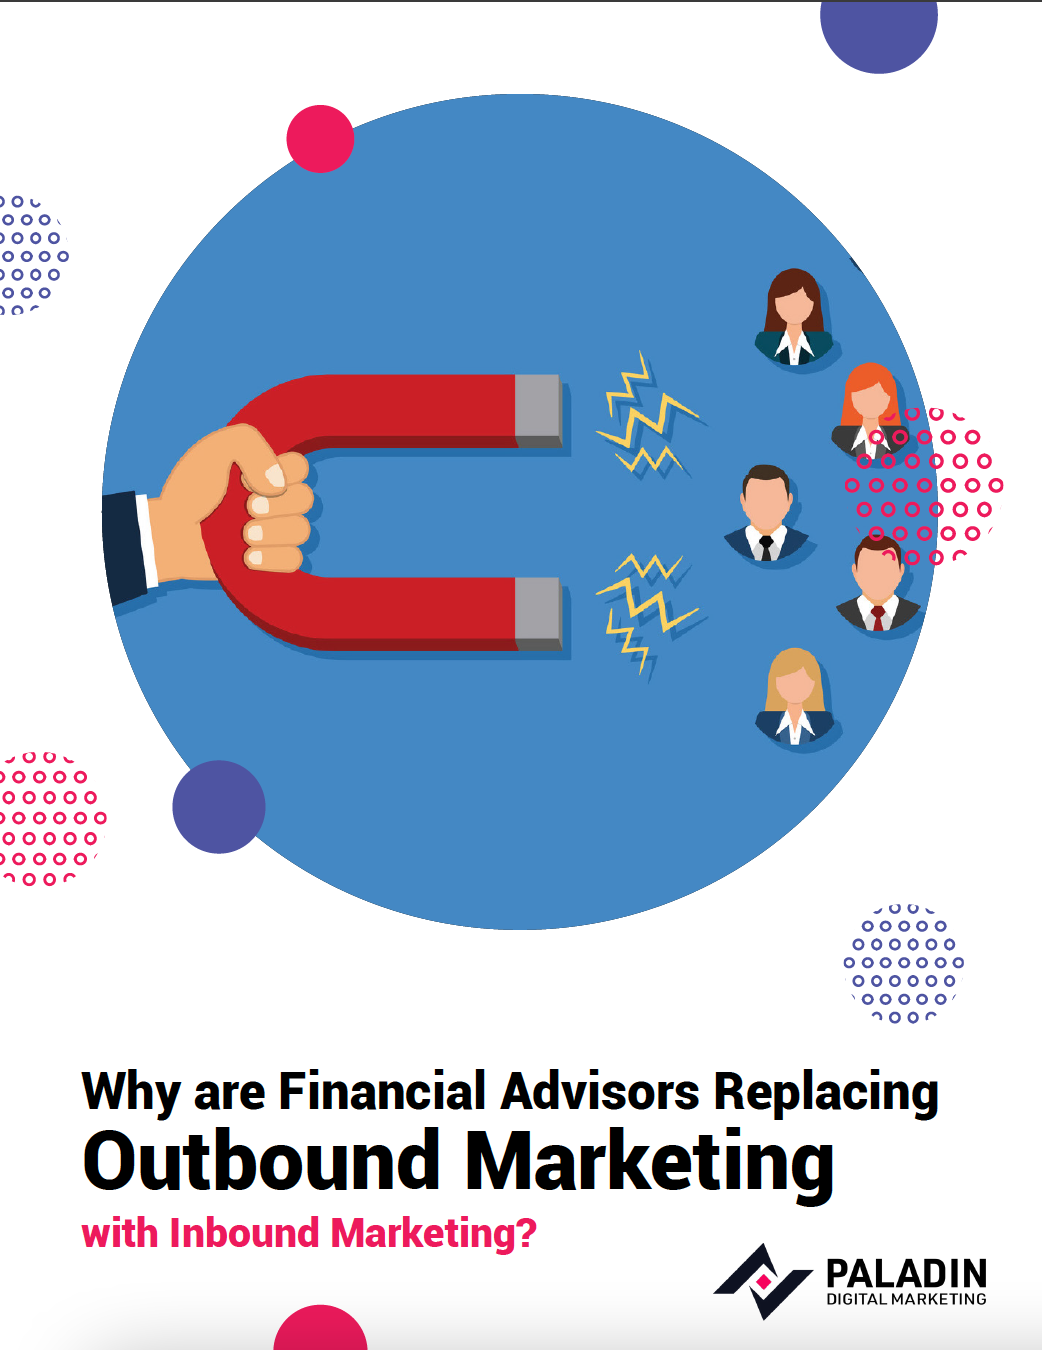 Why Are Financial Advisors Replacing Outbound Marketing With Inbound Marketing?